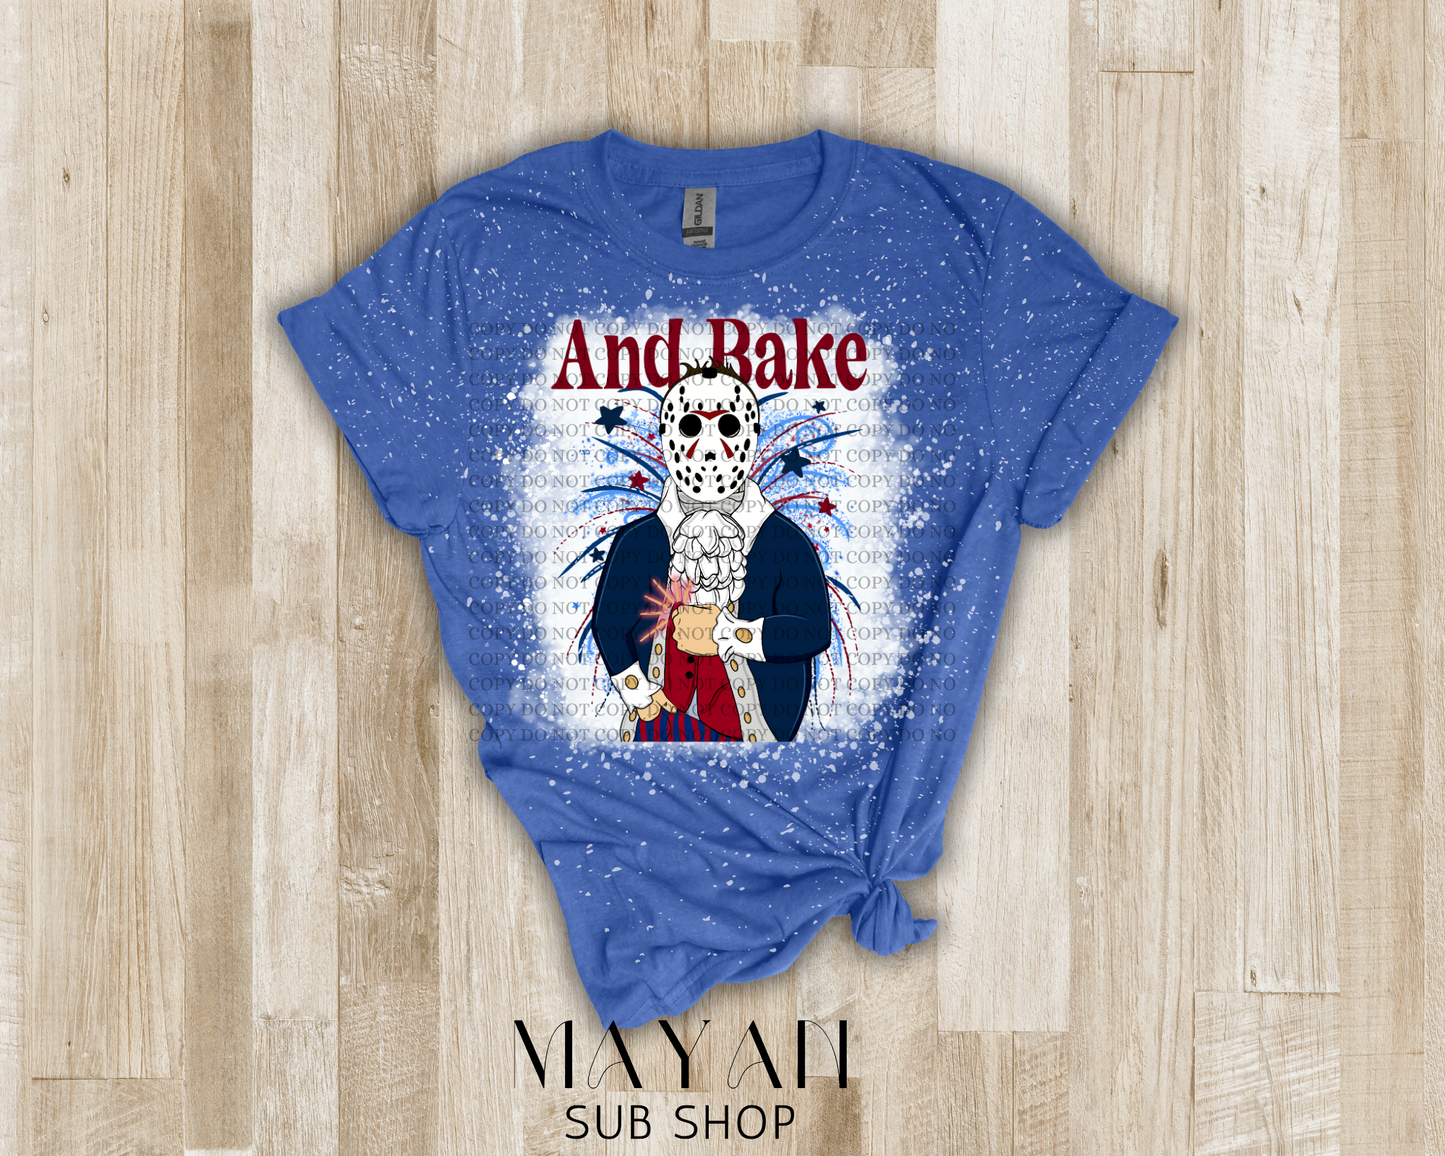 4th of July bake Jason bleached shirt in heather royal blue.